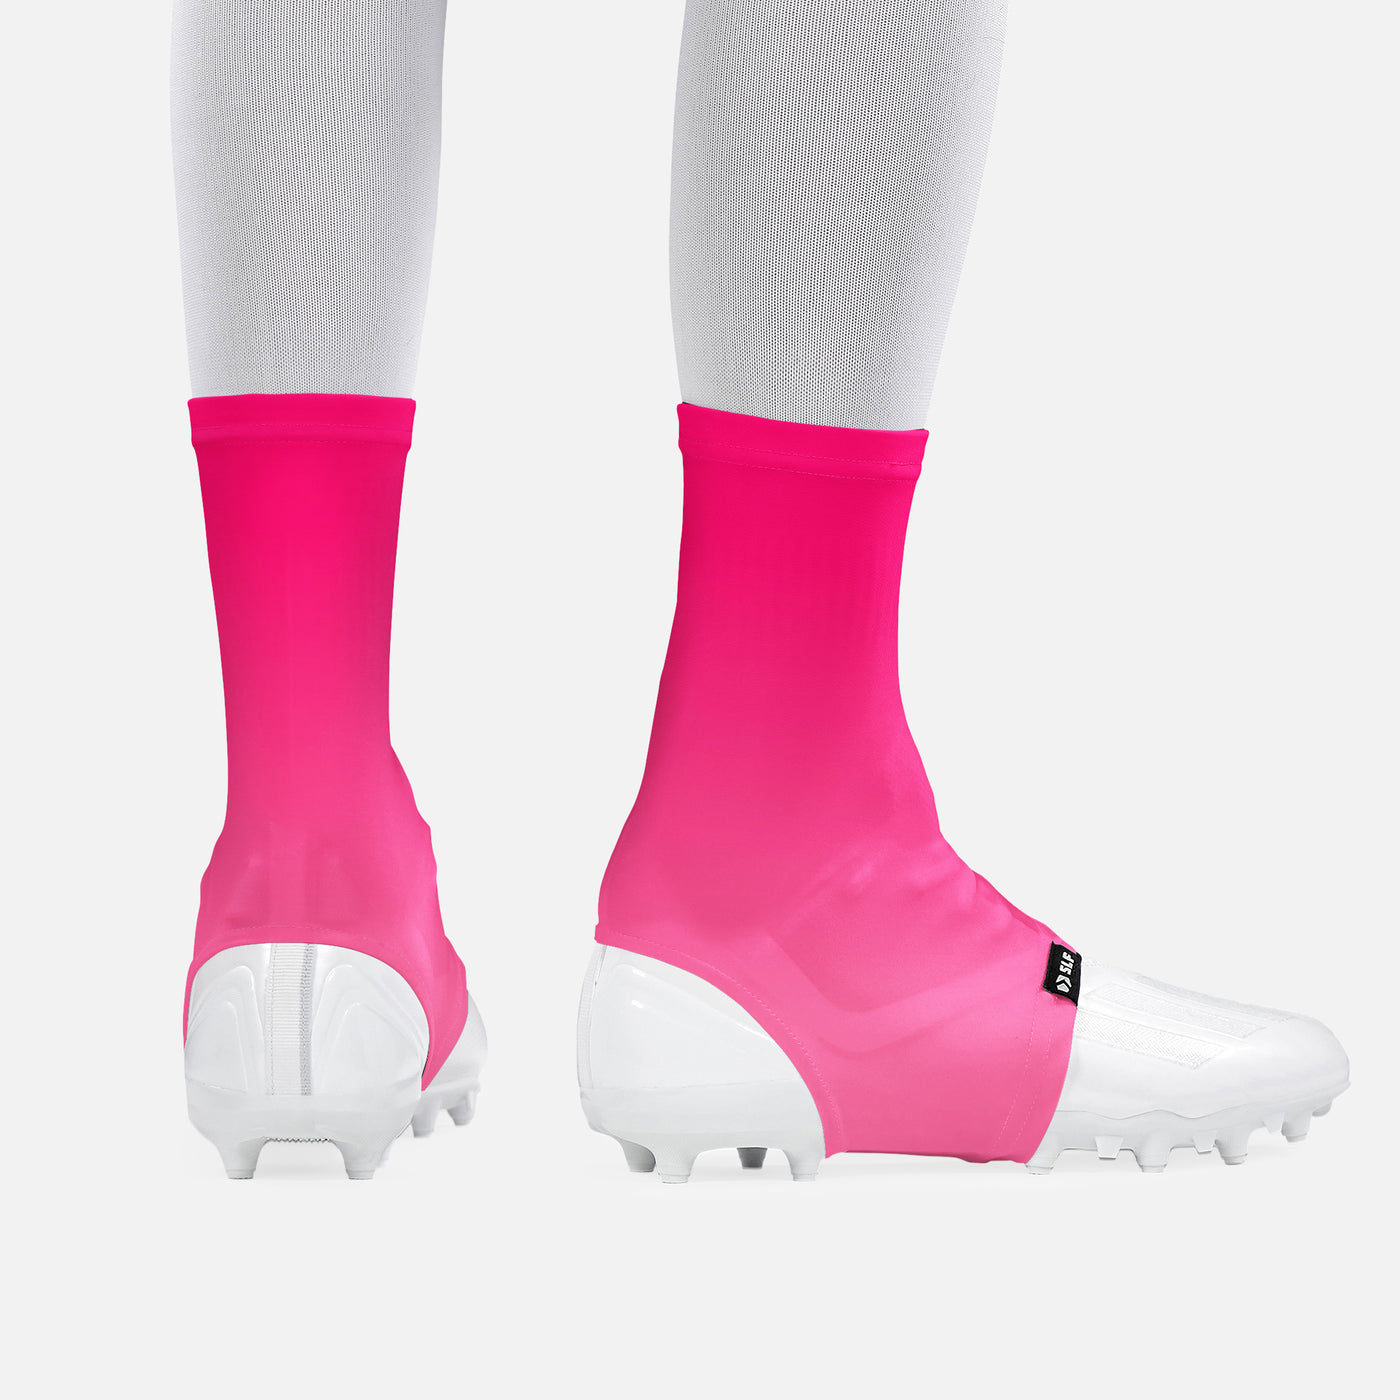 Pink Dawn Spats / Cleat Covers